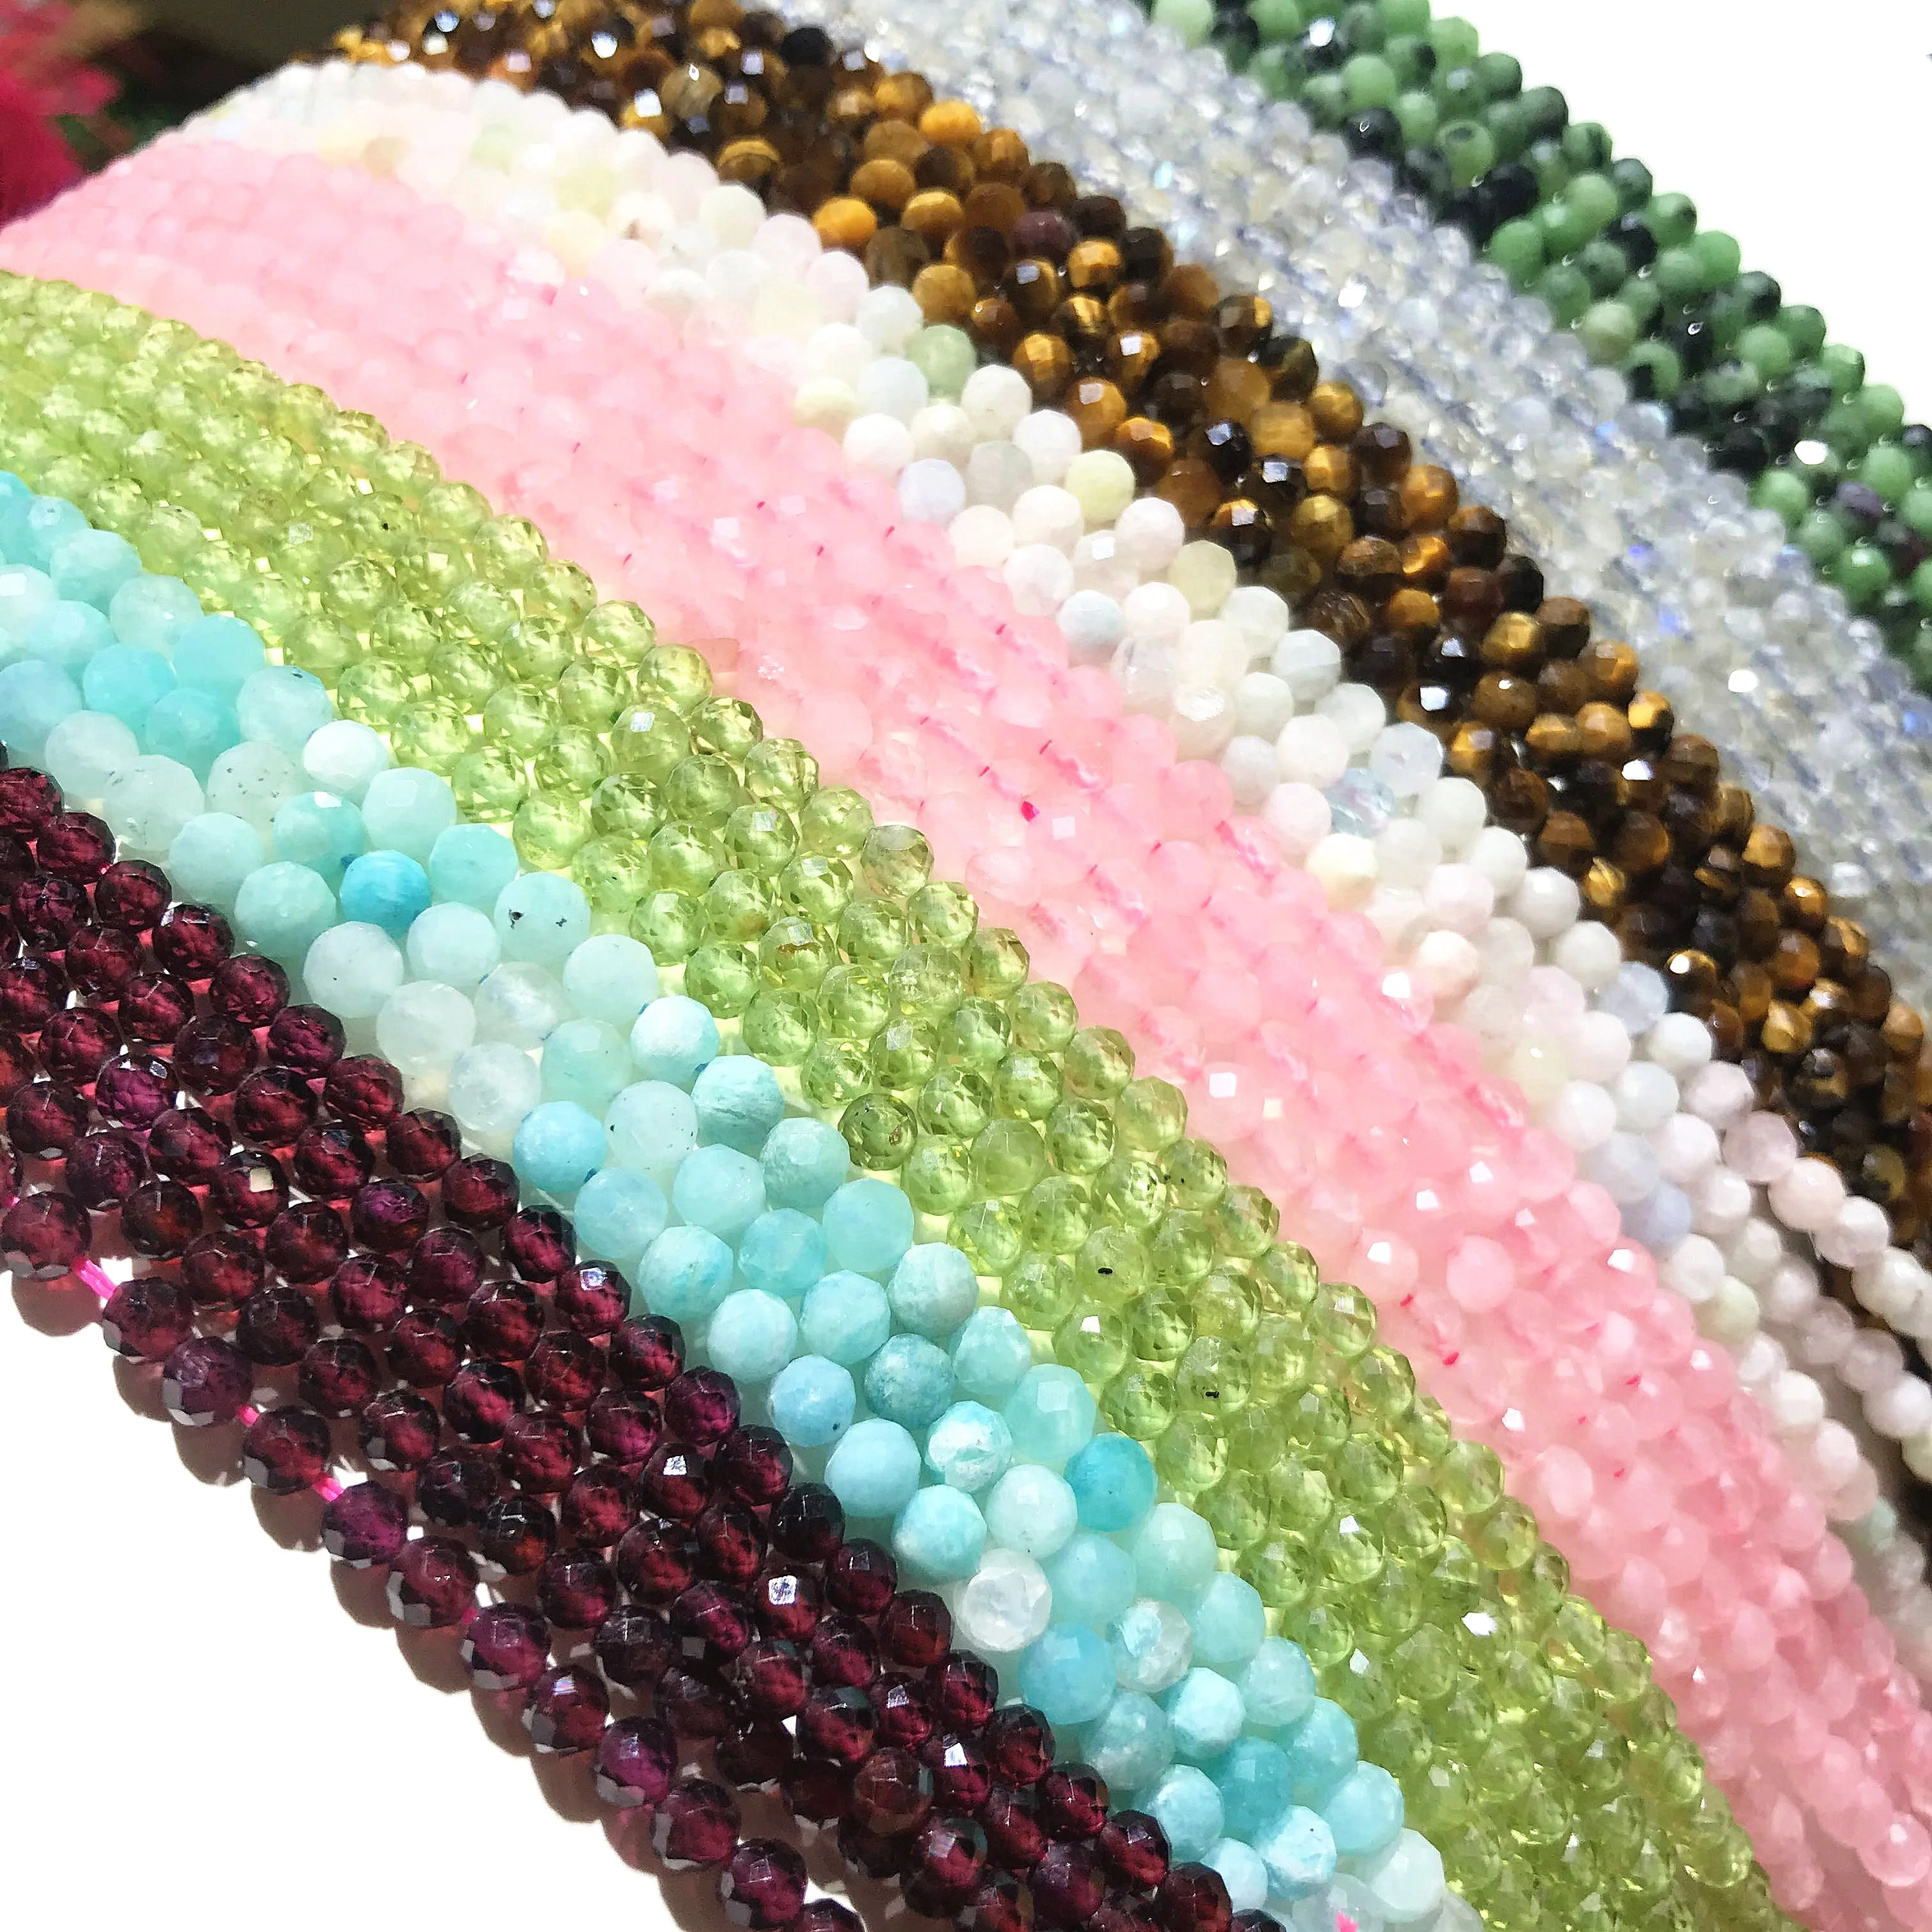 2mm 3mm 4mm Natural Stone Small Faceted Round Loose Bead Healing Energy Gemstone Jewelry for Making Diy Bracelet Necklace Design